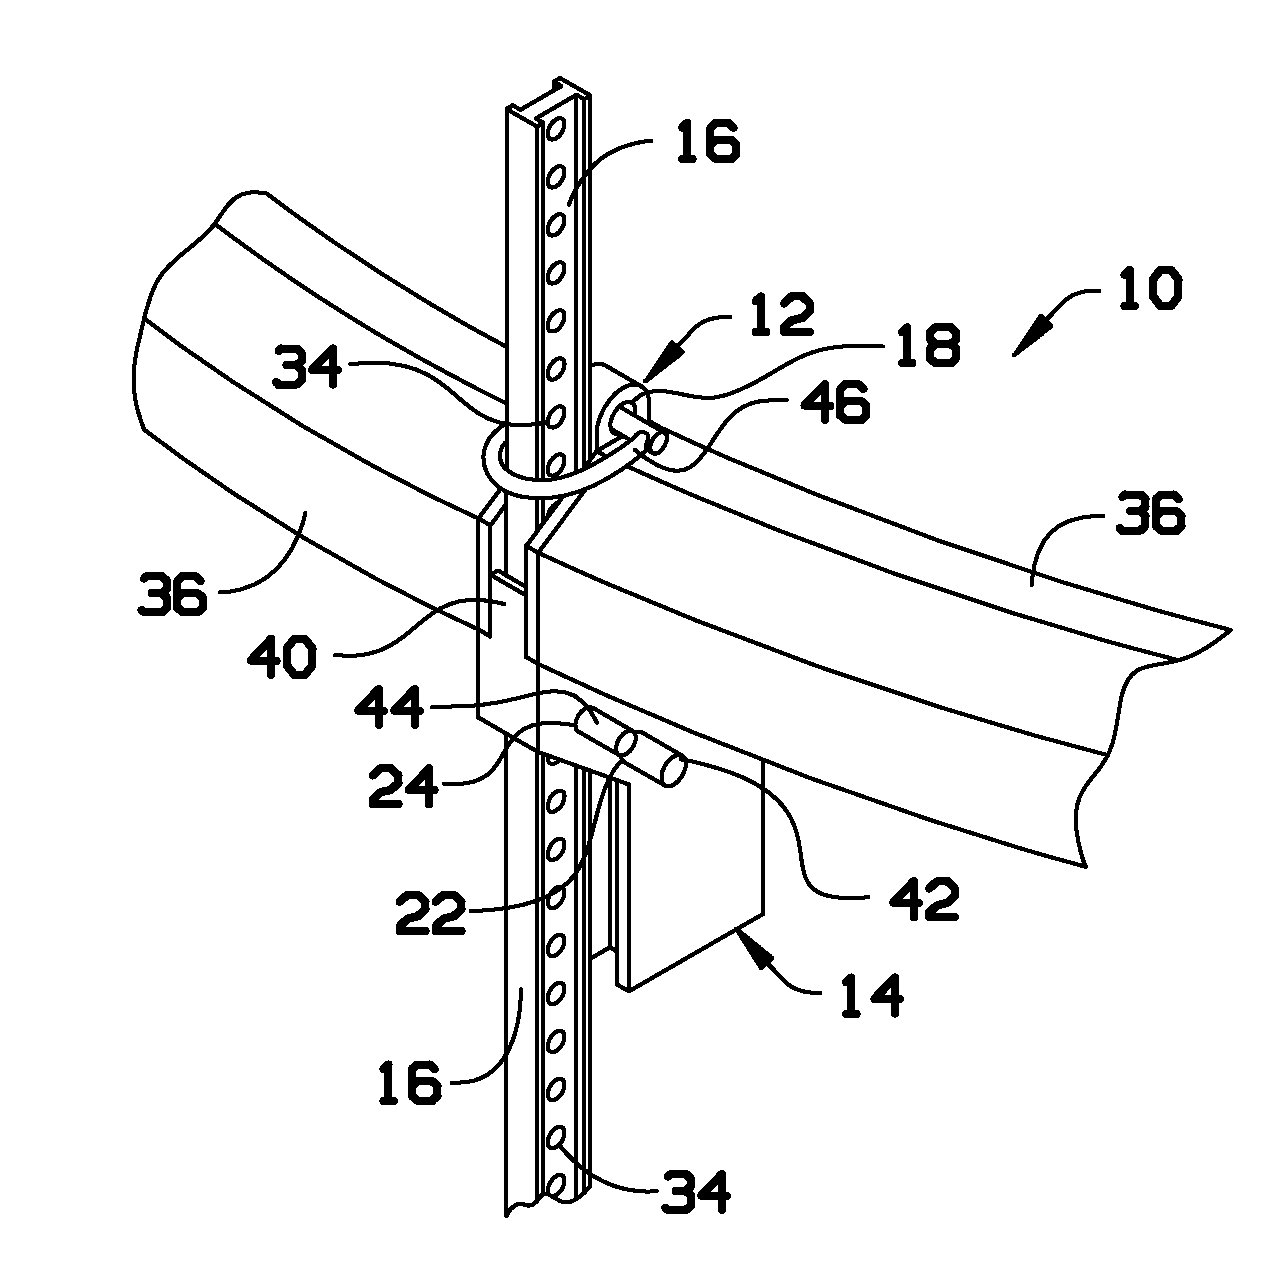 Bumper mounted holder for a high-lift jack